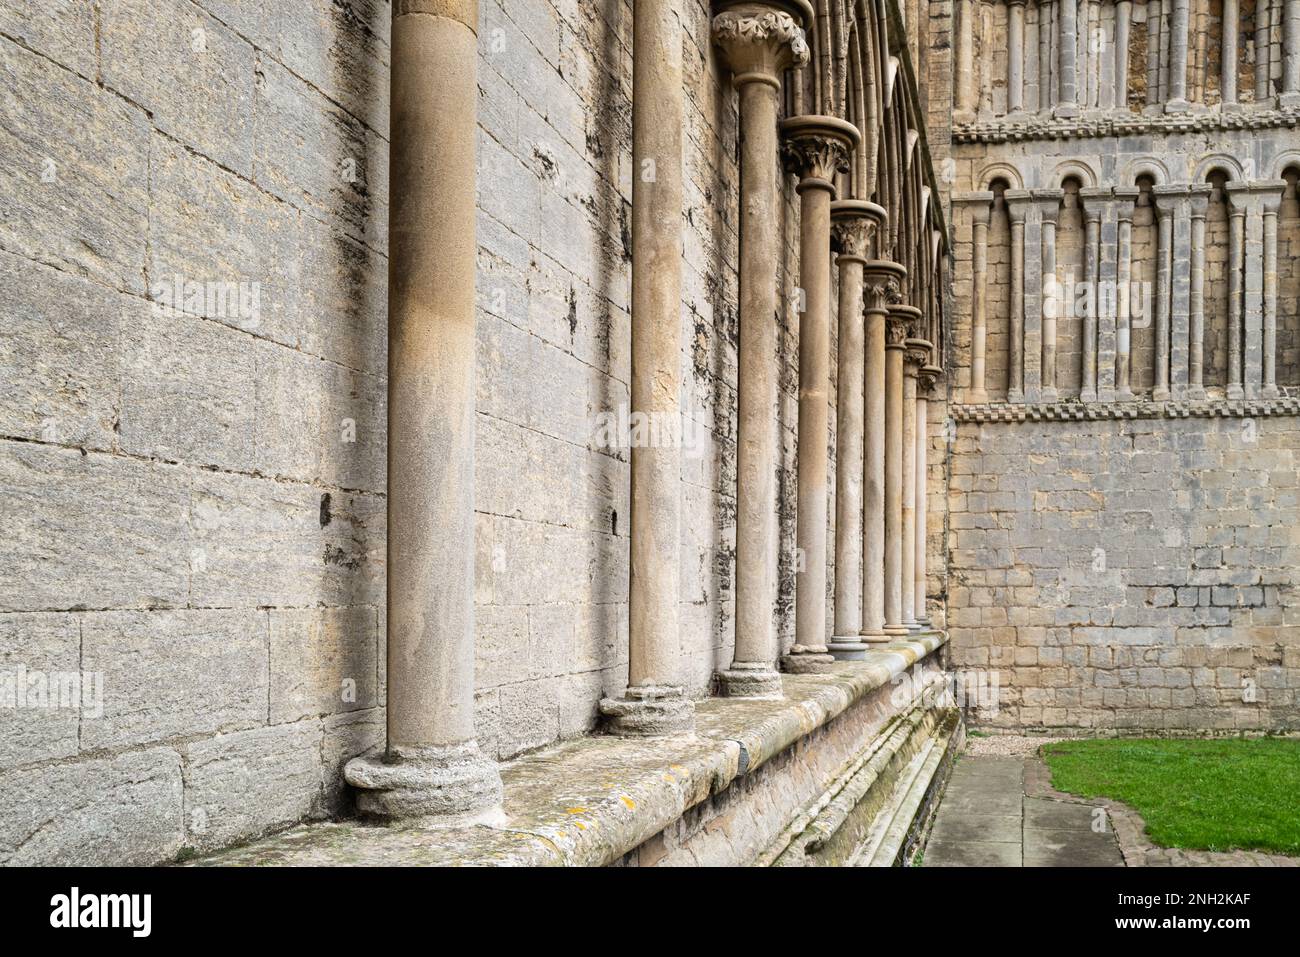 Magnificent stone work columns and outside wall features of a landmark English Cathedral. Stock Photo